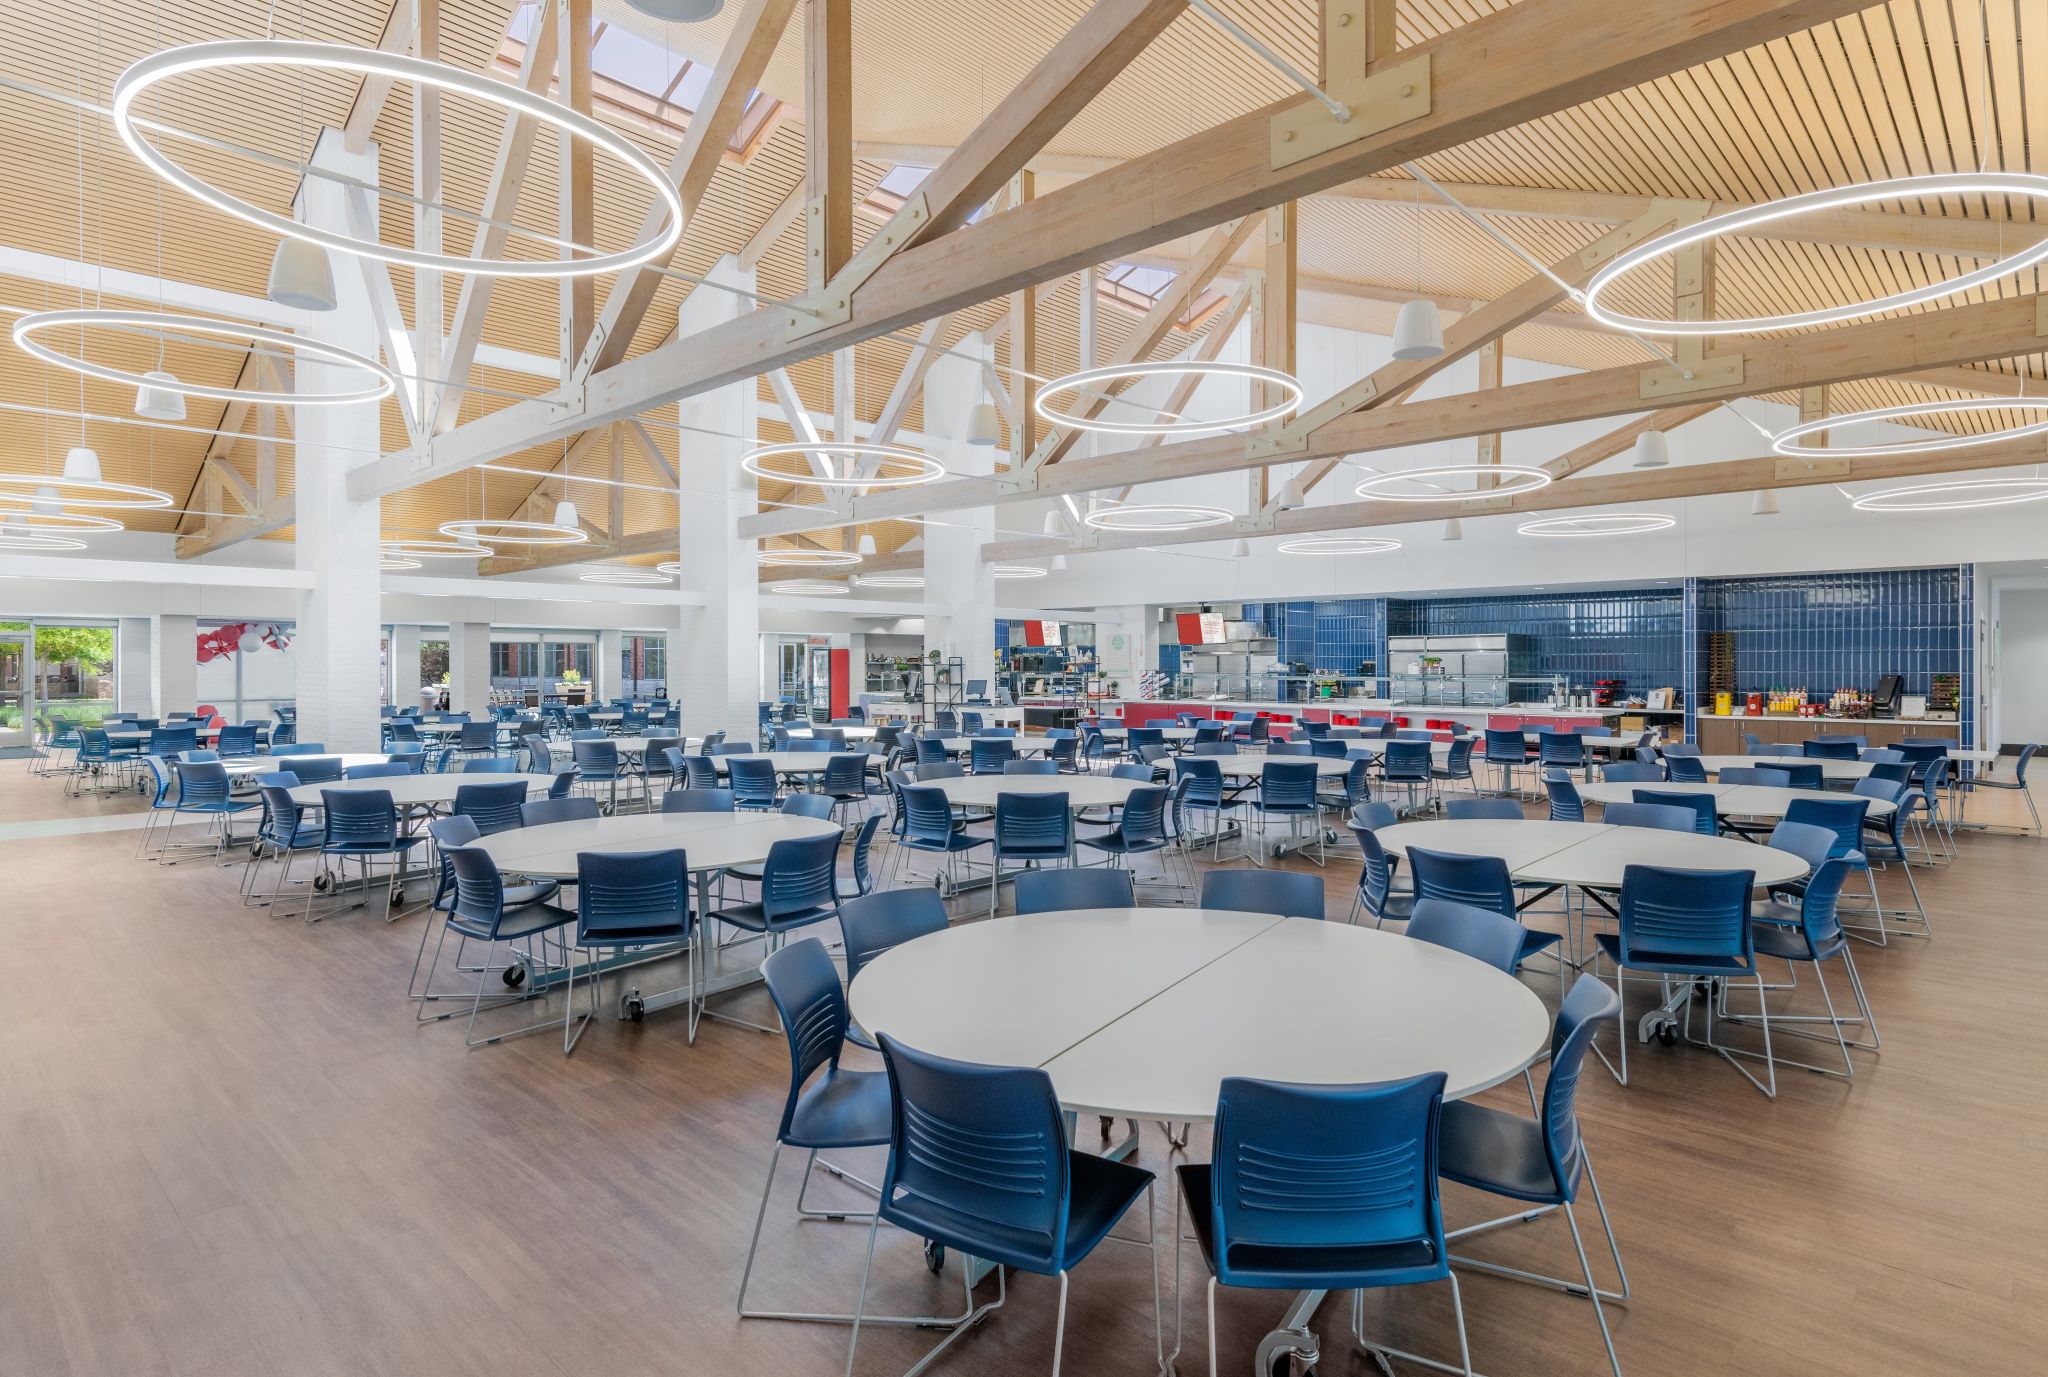 System-Electric-Ursuline-Academy- Dallas-Phase-3-Dining-Hall